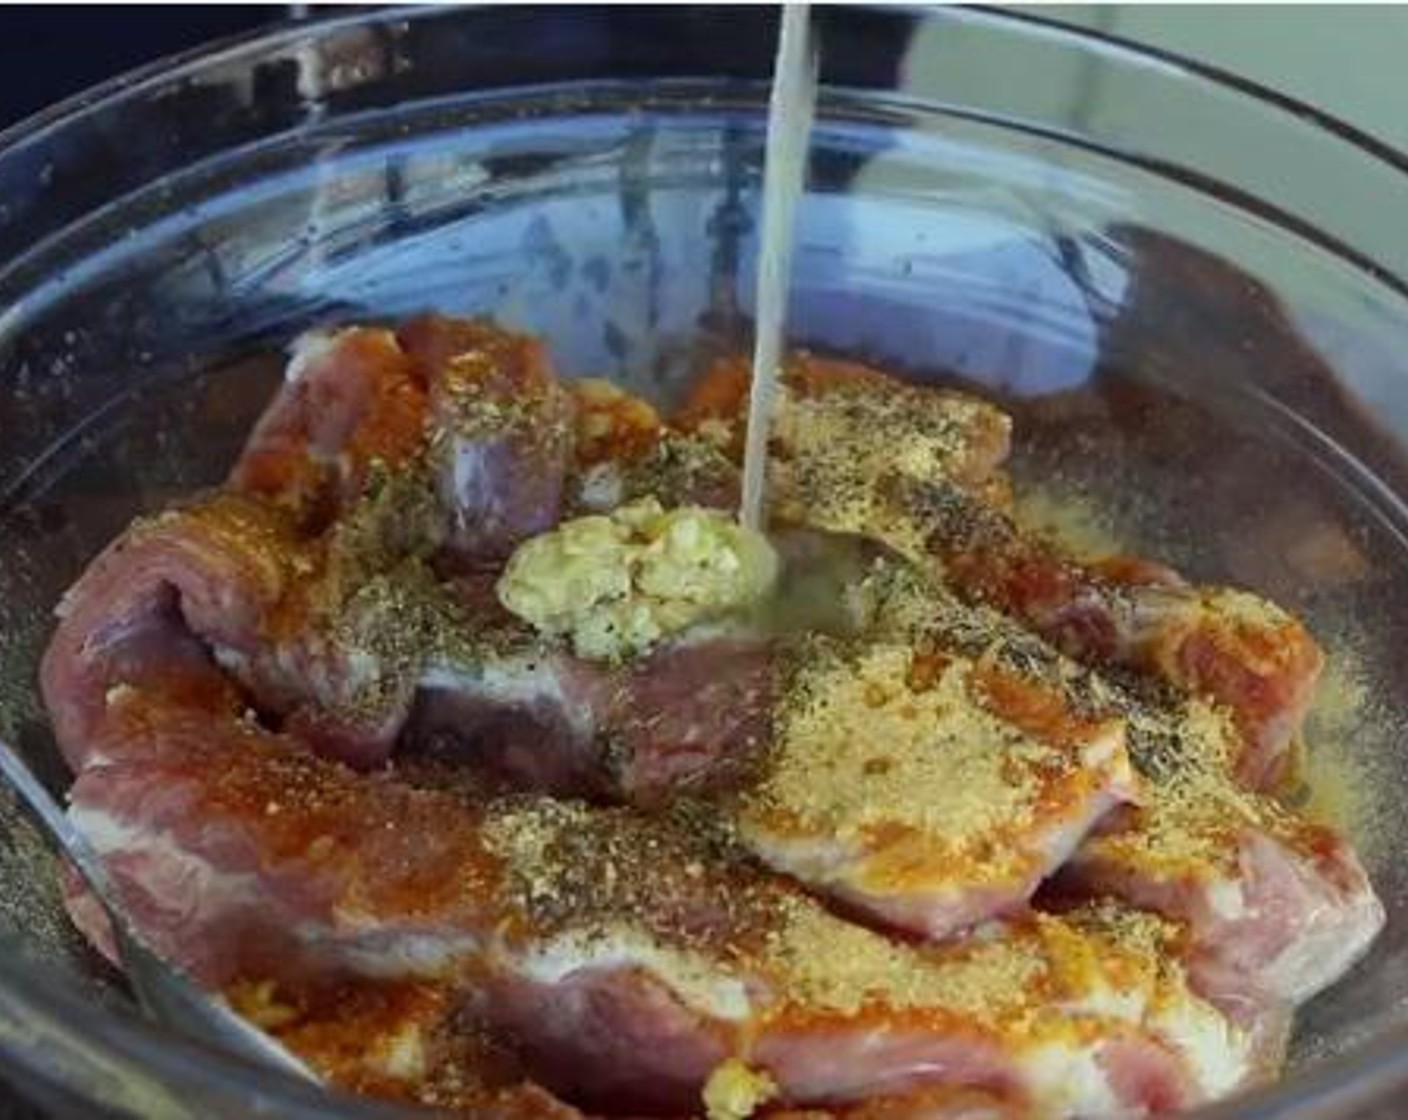 step 1 Remove the excess fat from the Spare Ribs (2 racks) and put them in a bowl. Add in the Dried Oregano (1 tsp), Garlic (4 cloves),Chicken Bouillon Powder (1 Tbsp), Ground Black Pepper (1/4 tsp), Soy Sauce (1 tsp), and juice from Lemons (2). Mix everything well.